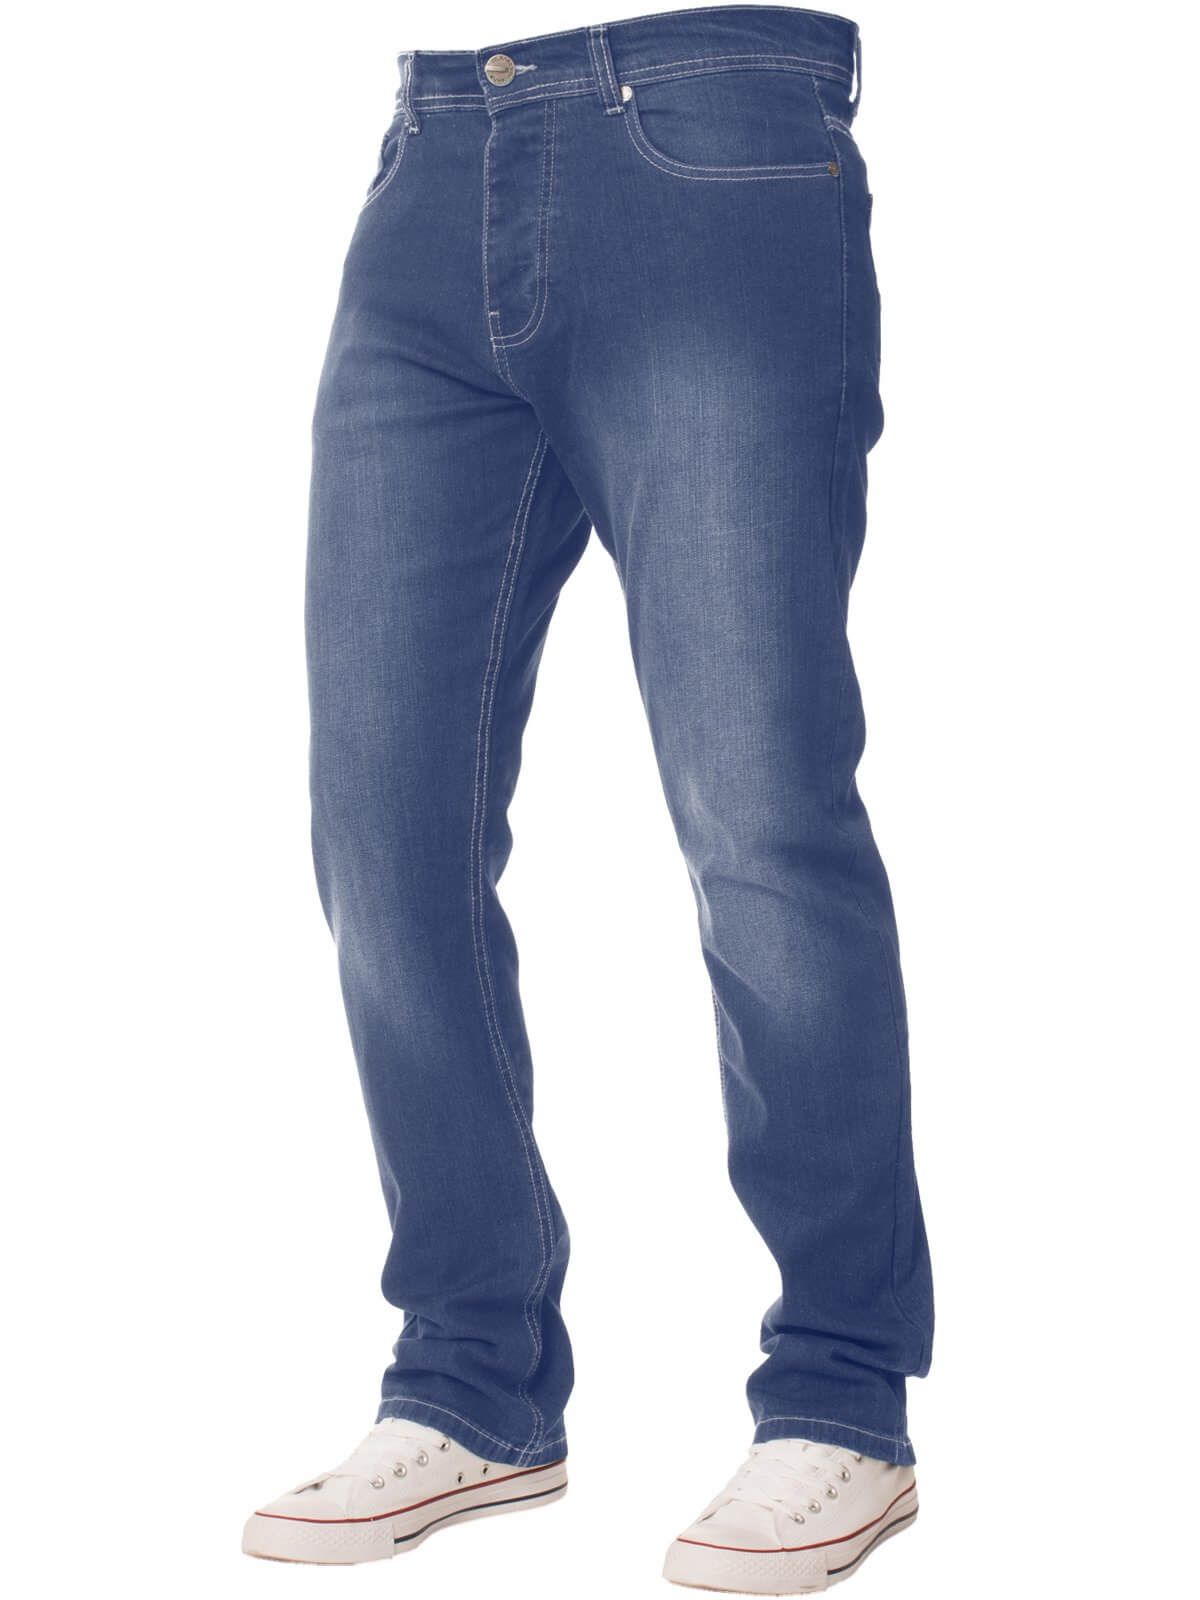 No man's wardrobe is complete without a versatile pair of regular light blue straight fit jeans. This evergreen classic by Enzo is tailored in a hard wearing dark blue cotton stretch blend and features 5 pockets with a coin pocket and a button fly while branded button and rivets and a branded PU waist label add a designer touch. With sizes up to 48 waist available at the online fashion website, theres a pair to suit everyone.